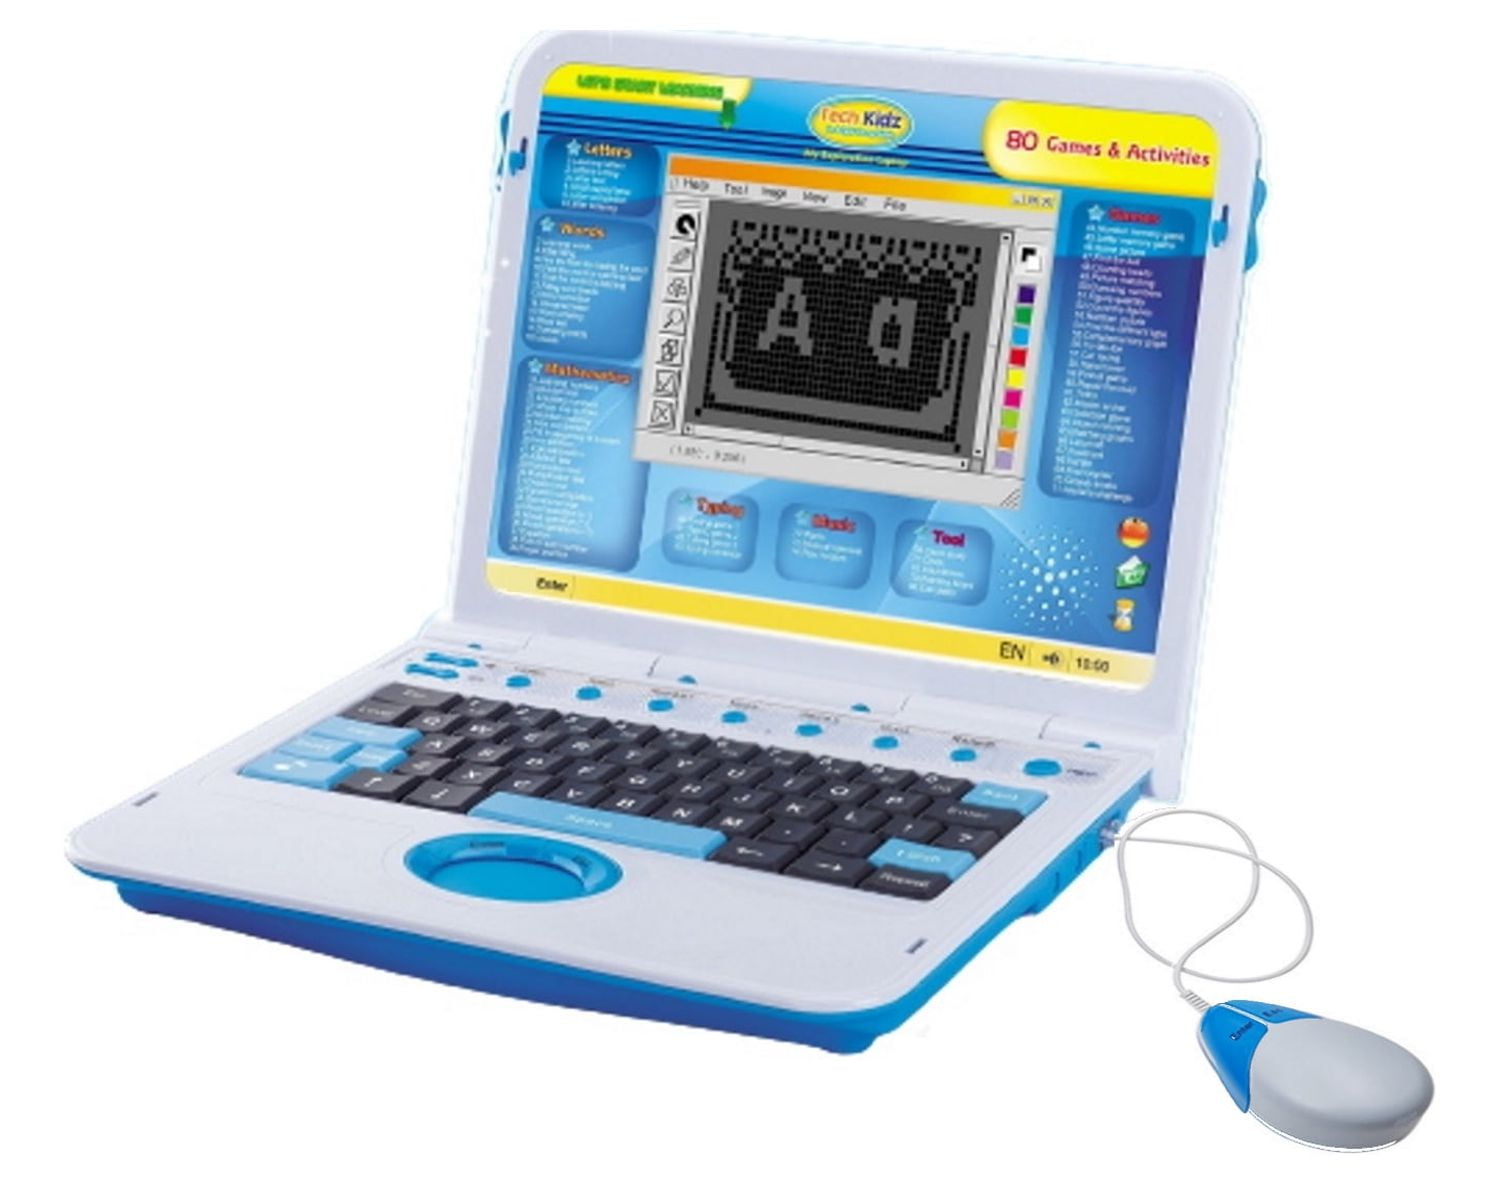 Toy Tote and Go Laptop from Vtech - Learn English Alphabet